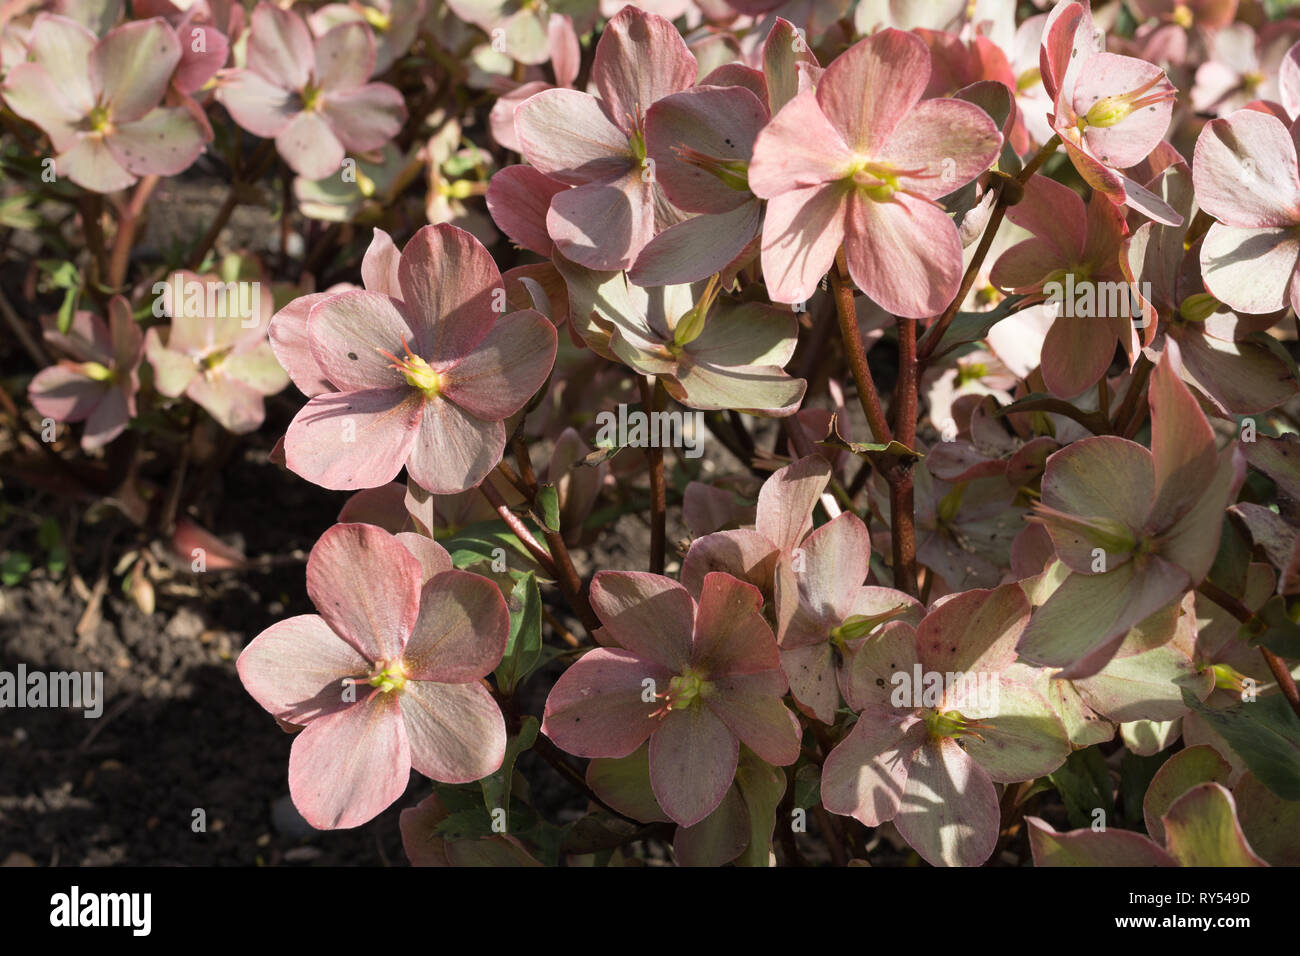 Helleborus Camelot (Lenten rose) flowers in March, early spring flowering plant in an English garden, UK Stock Photo